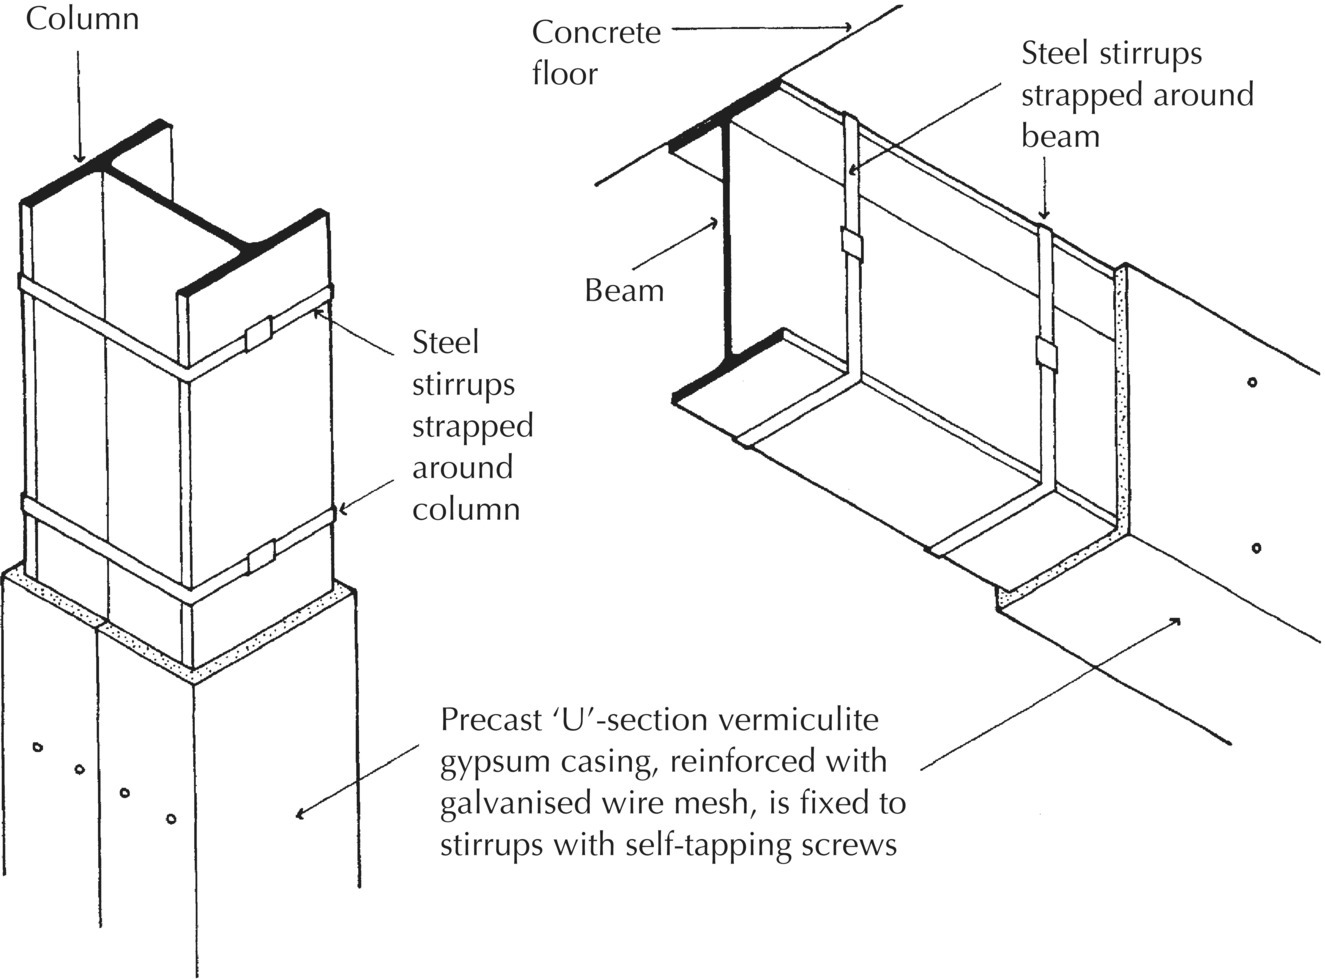 Diagrams of column (left) and beam (right) with arrows to concrete floor, steel stirrups strapped around column and beam, and precast ‘U’-section vermiculite gypsum casing fixed to stirrups with self-tapping screws.